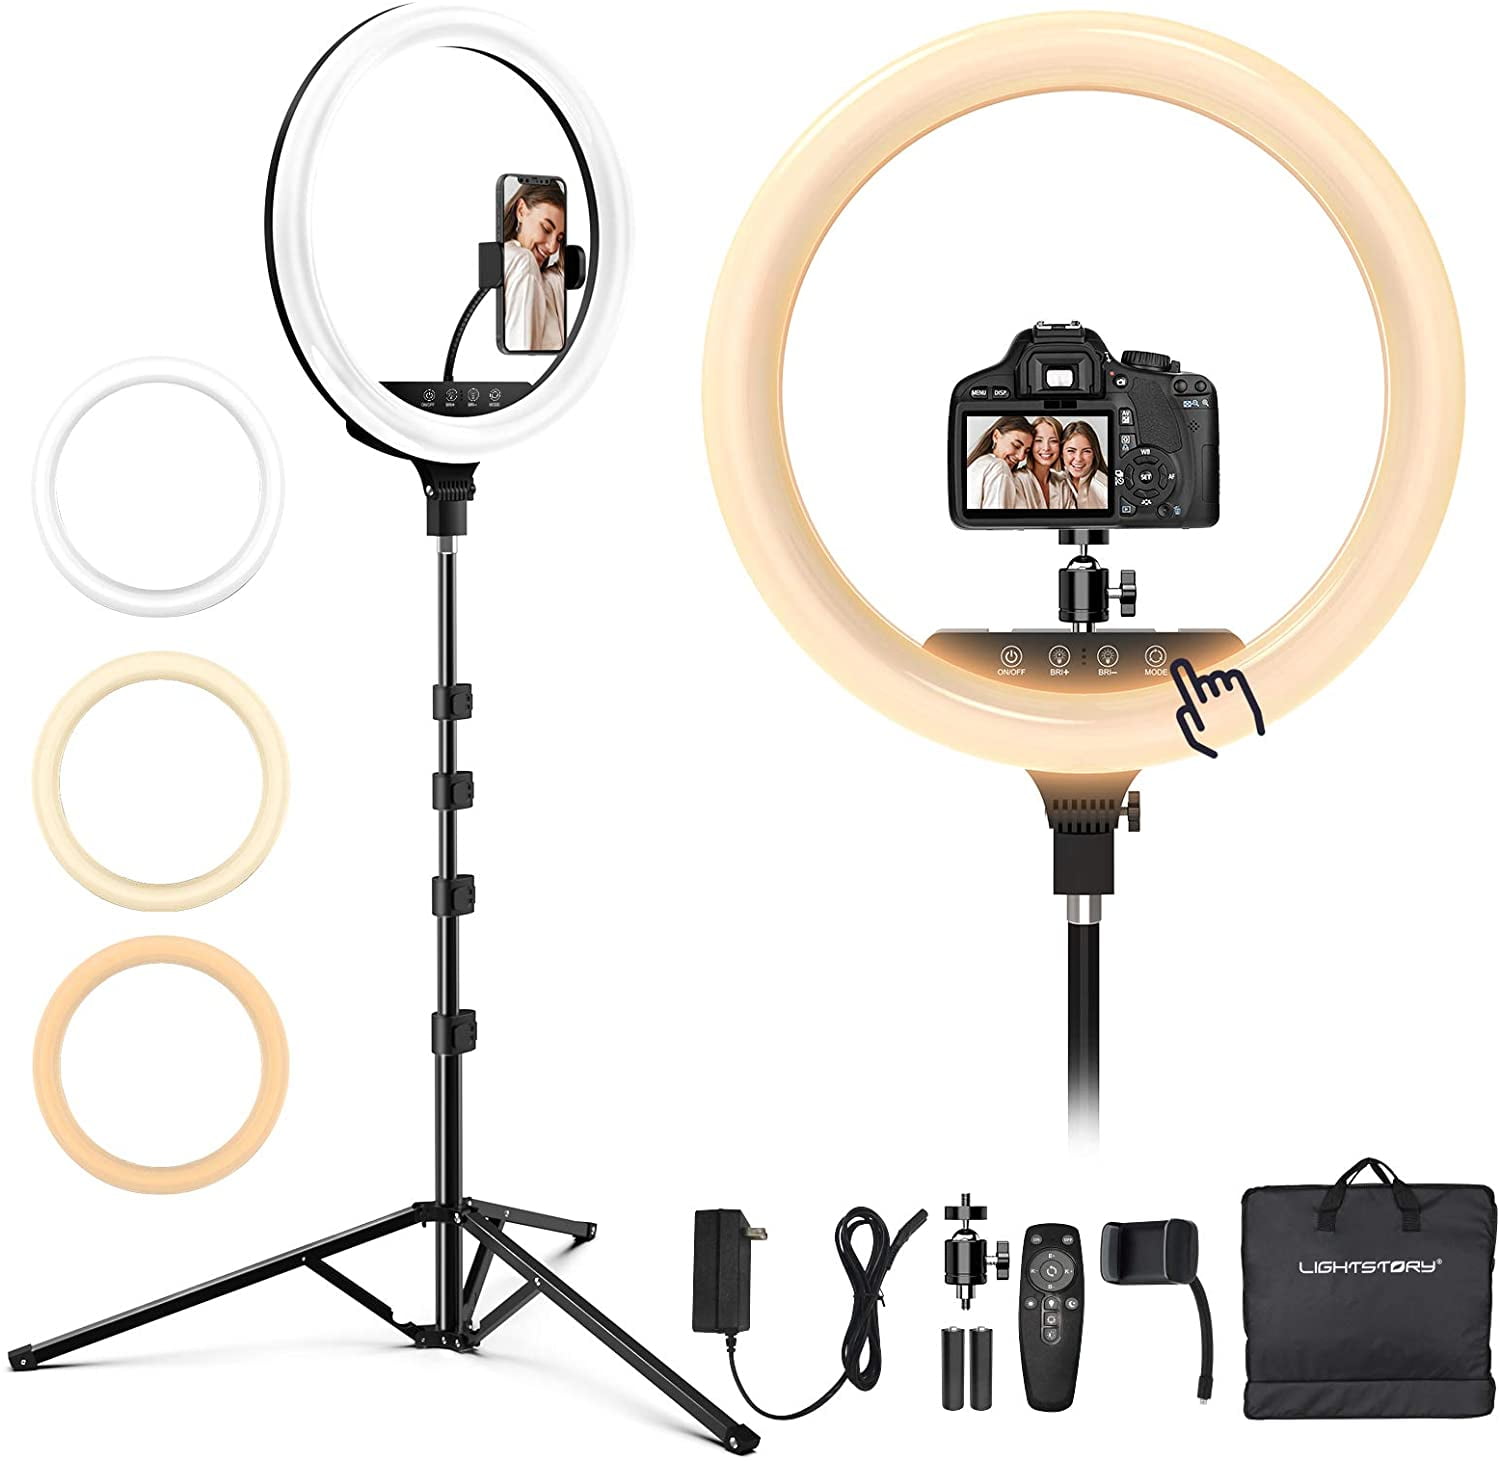 3000K-6500K Dimmable Lighting Kit Carrying Bag 18 inch Led Ring Light with Tripod Stand & Phone Holder Touch and Remote Controller for Photo Studio/Makeup/YouTube Video/Camera